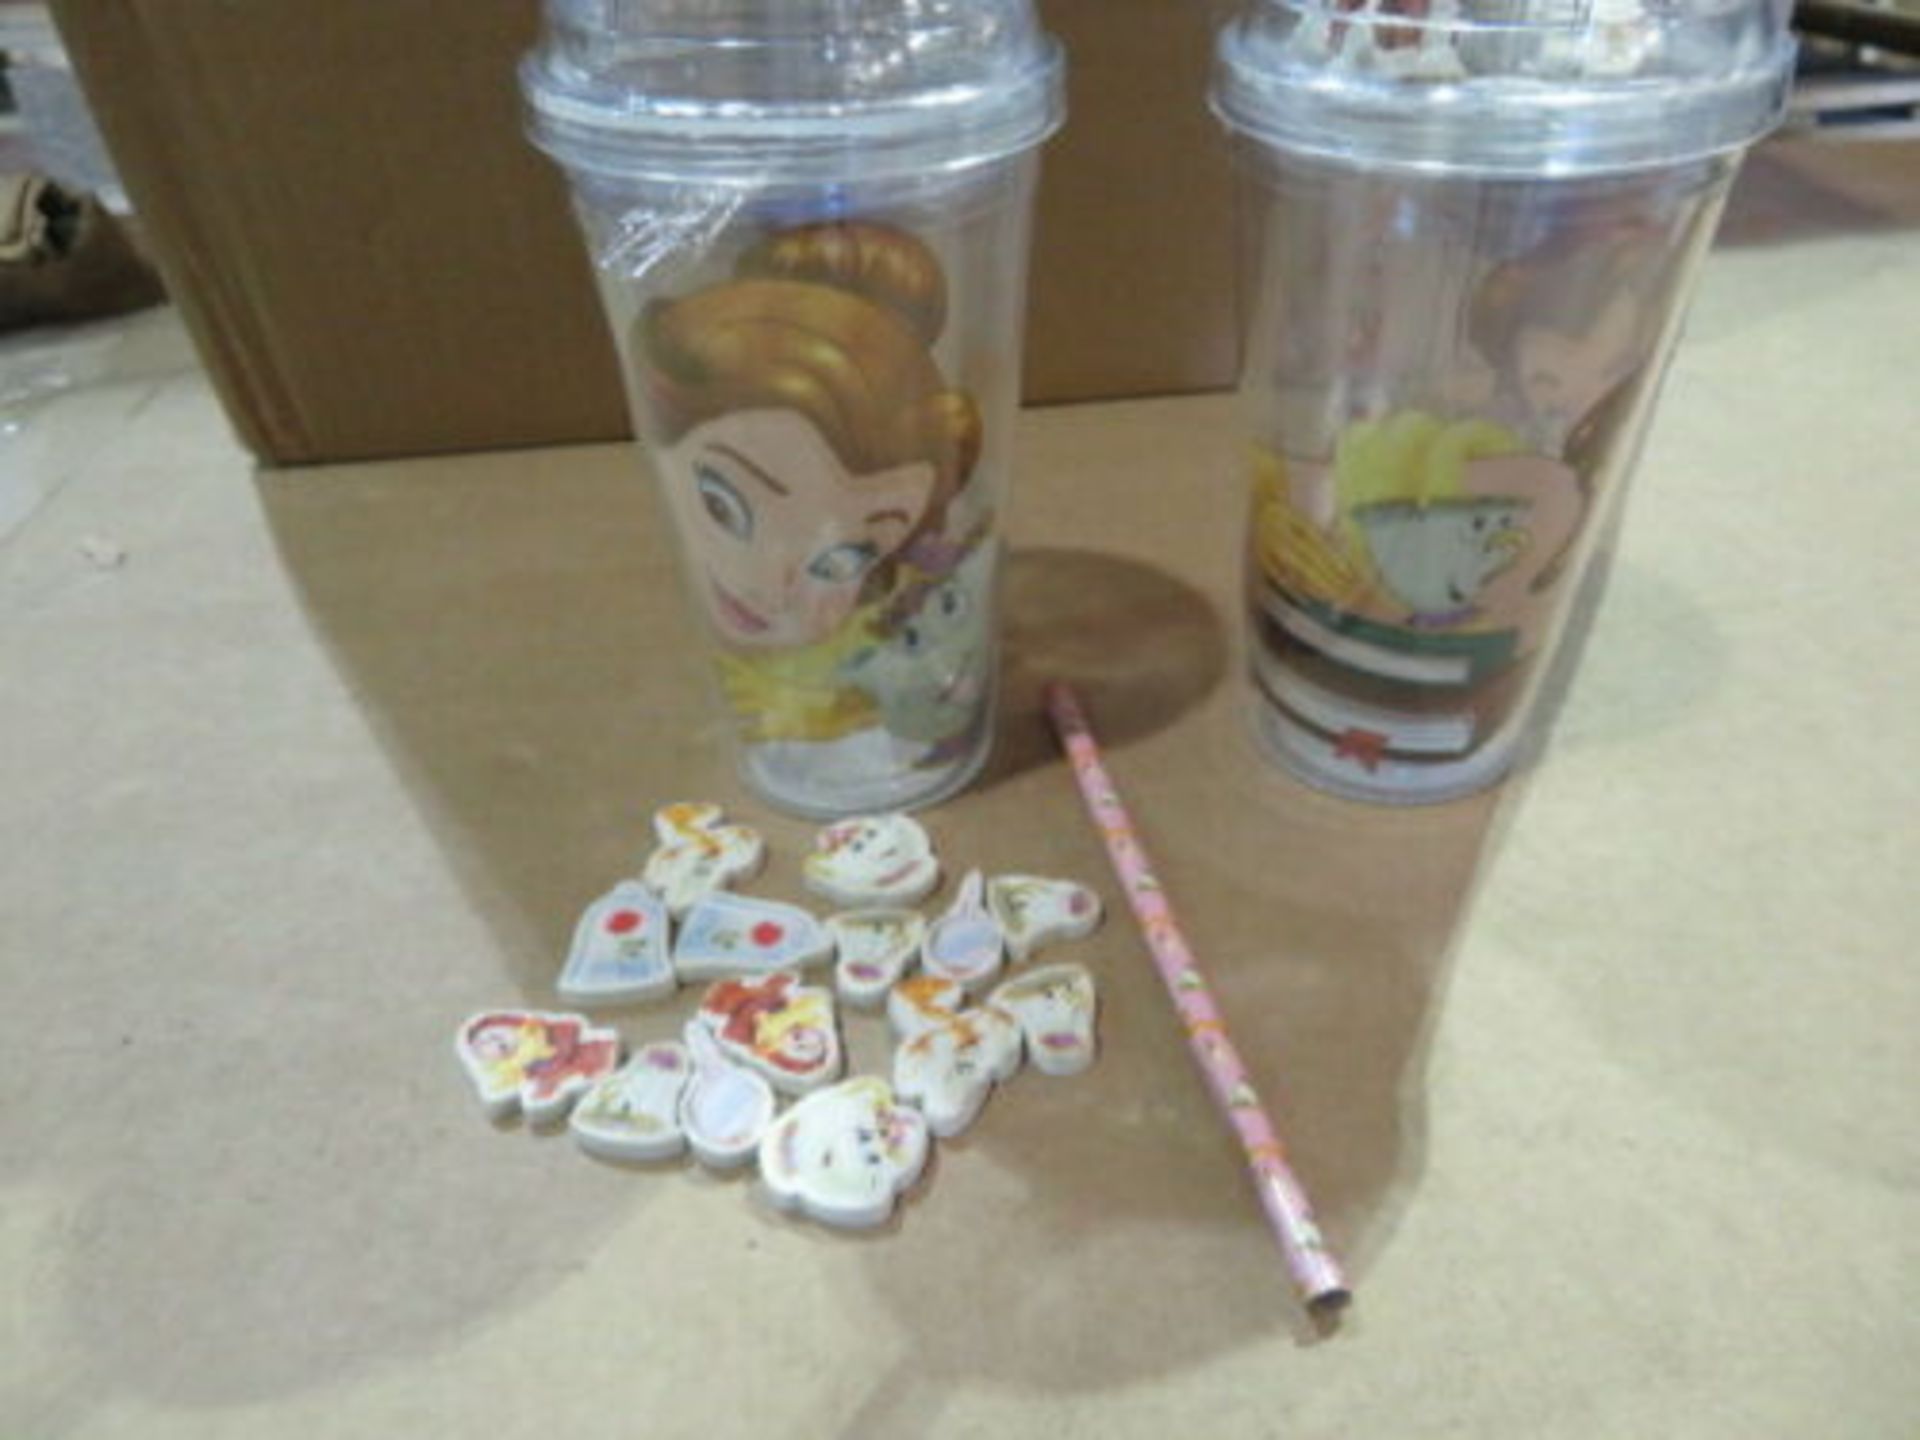 WHOLESALE JOB LOT 24 X NEW DISNEY BEAUTY AND THE BEAST CUP WITH ERASERS & PENCIL. WHOLESALE JOB... - Image 3 of 3